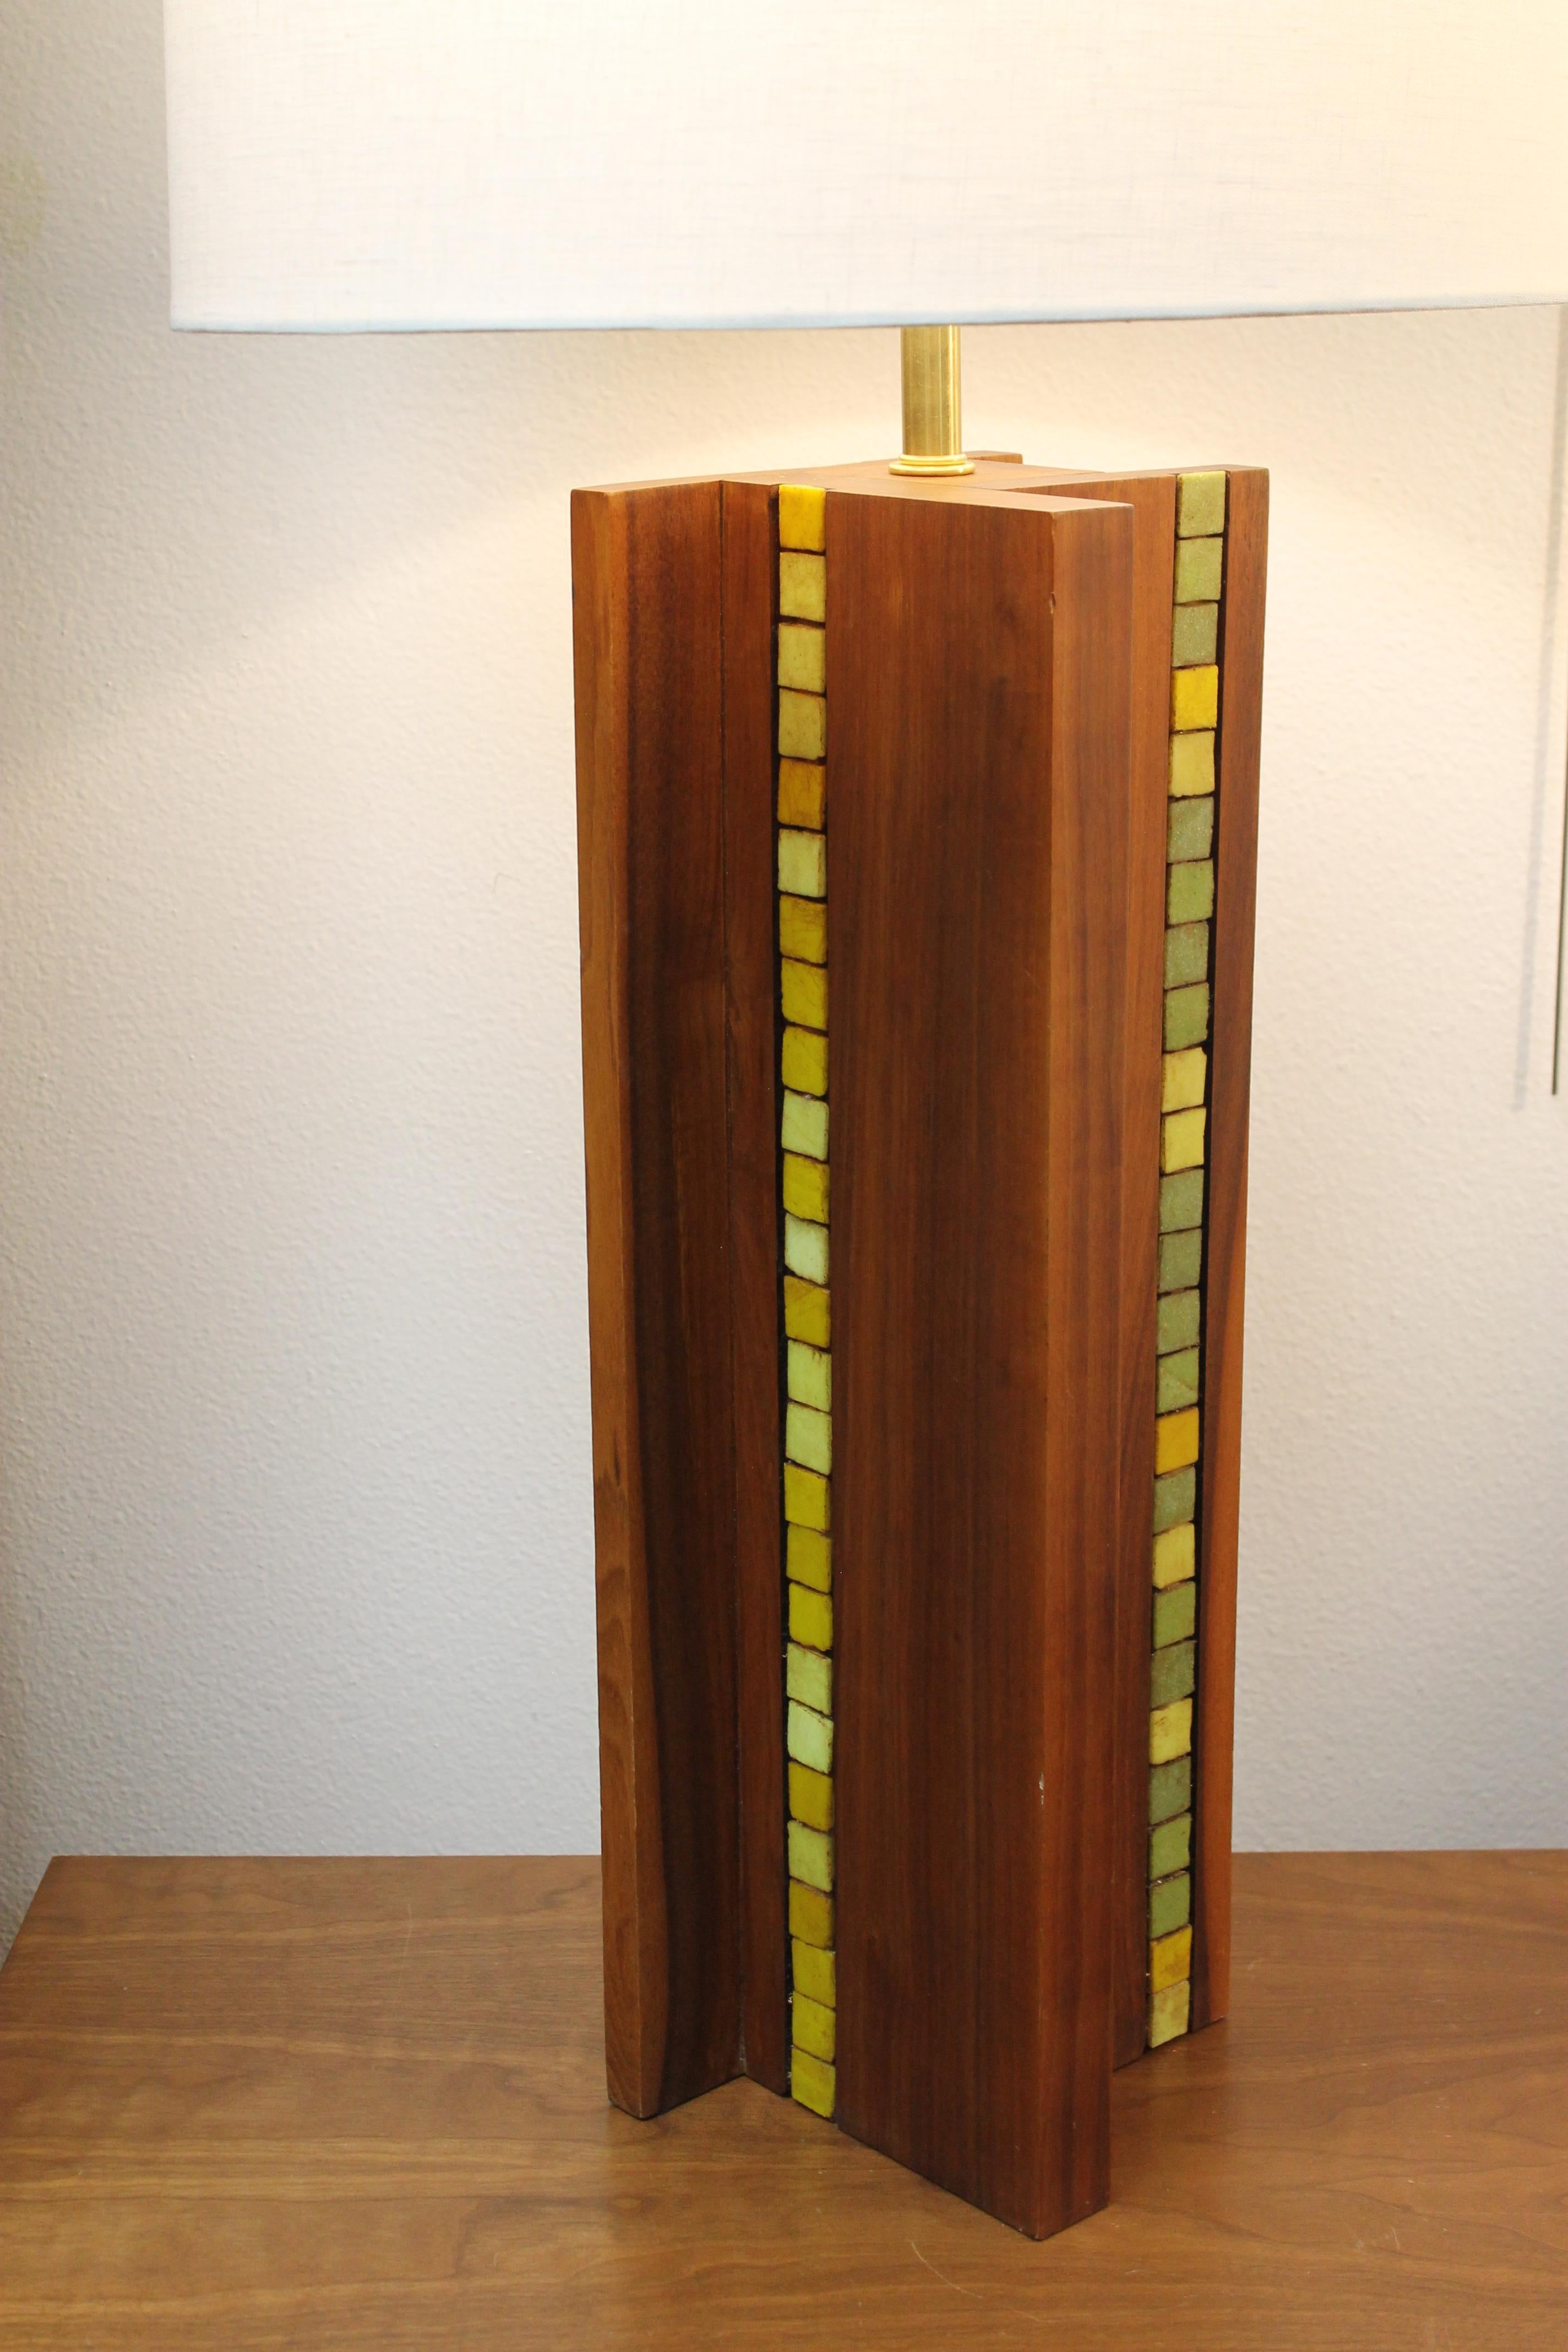 Teak lamp with ceramic tiles in the style of Martz. There are 3 sides which have been tiled.  Lamp is not signed and has been professionally rewired for 3-way light bulbs. Lamp shade is not included. Lamp measures 8.25